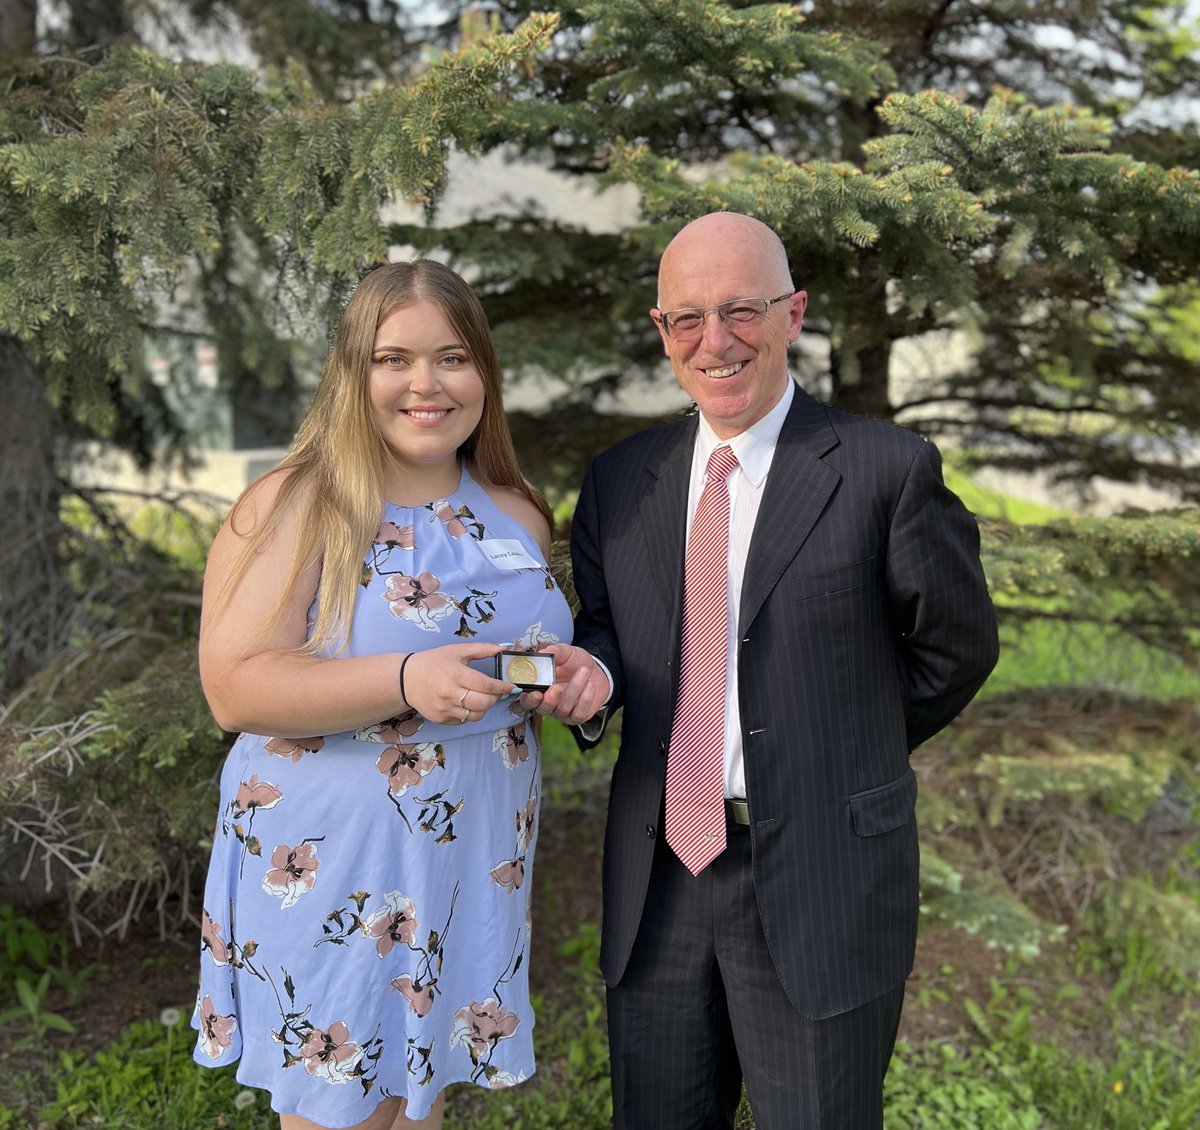 The President’s medal, given for outstanding qualities of leadership, is presented to Lacey Calder #umanitoba2022